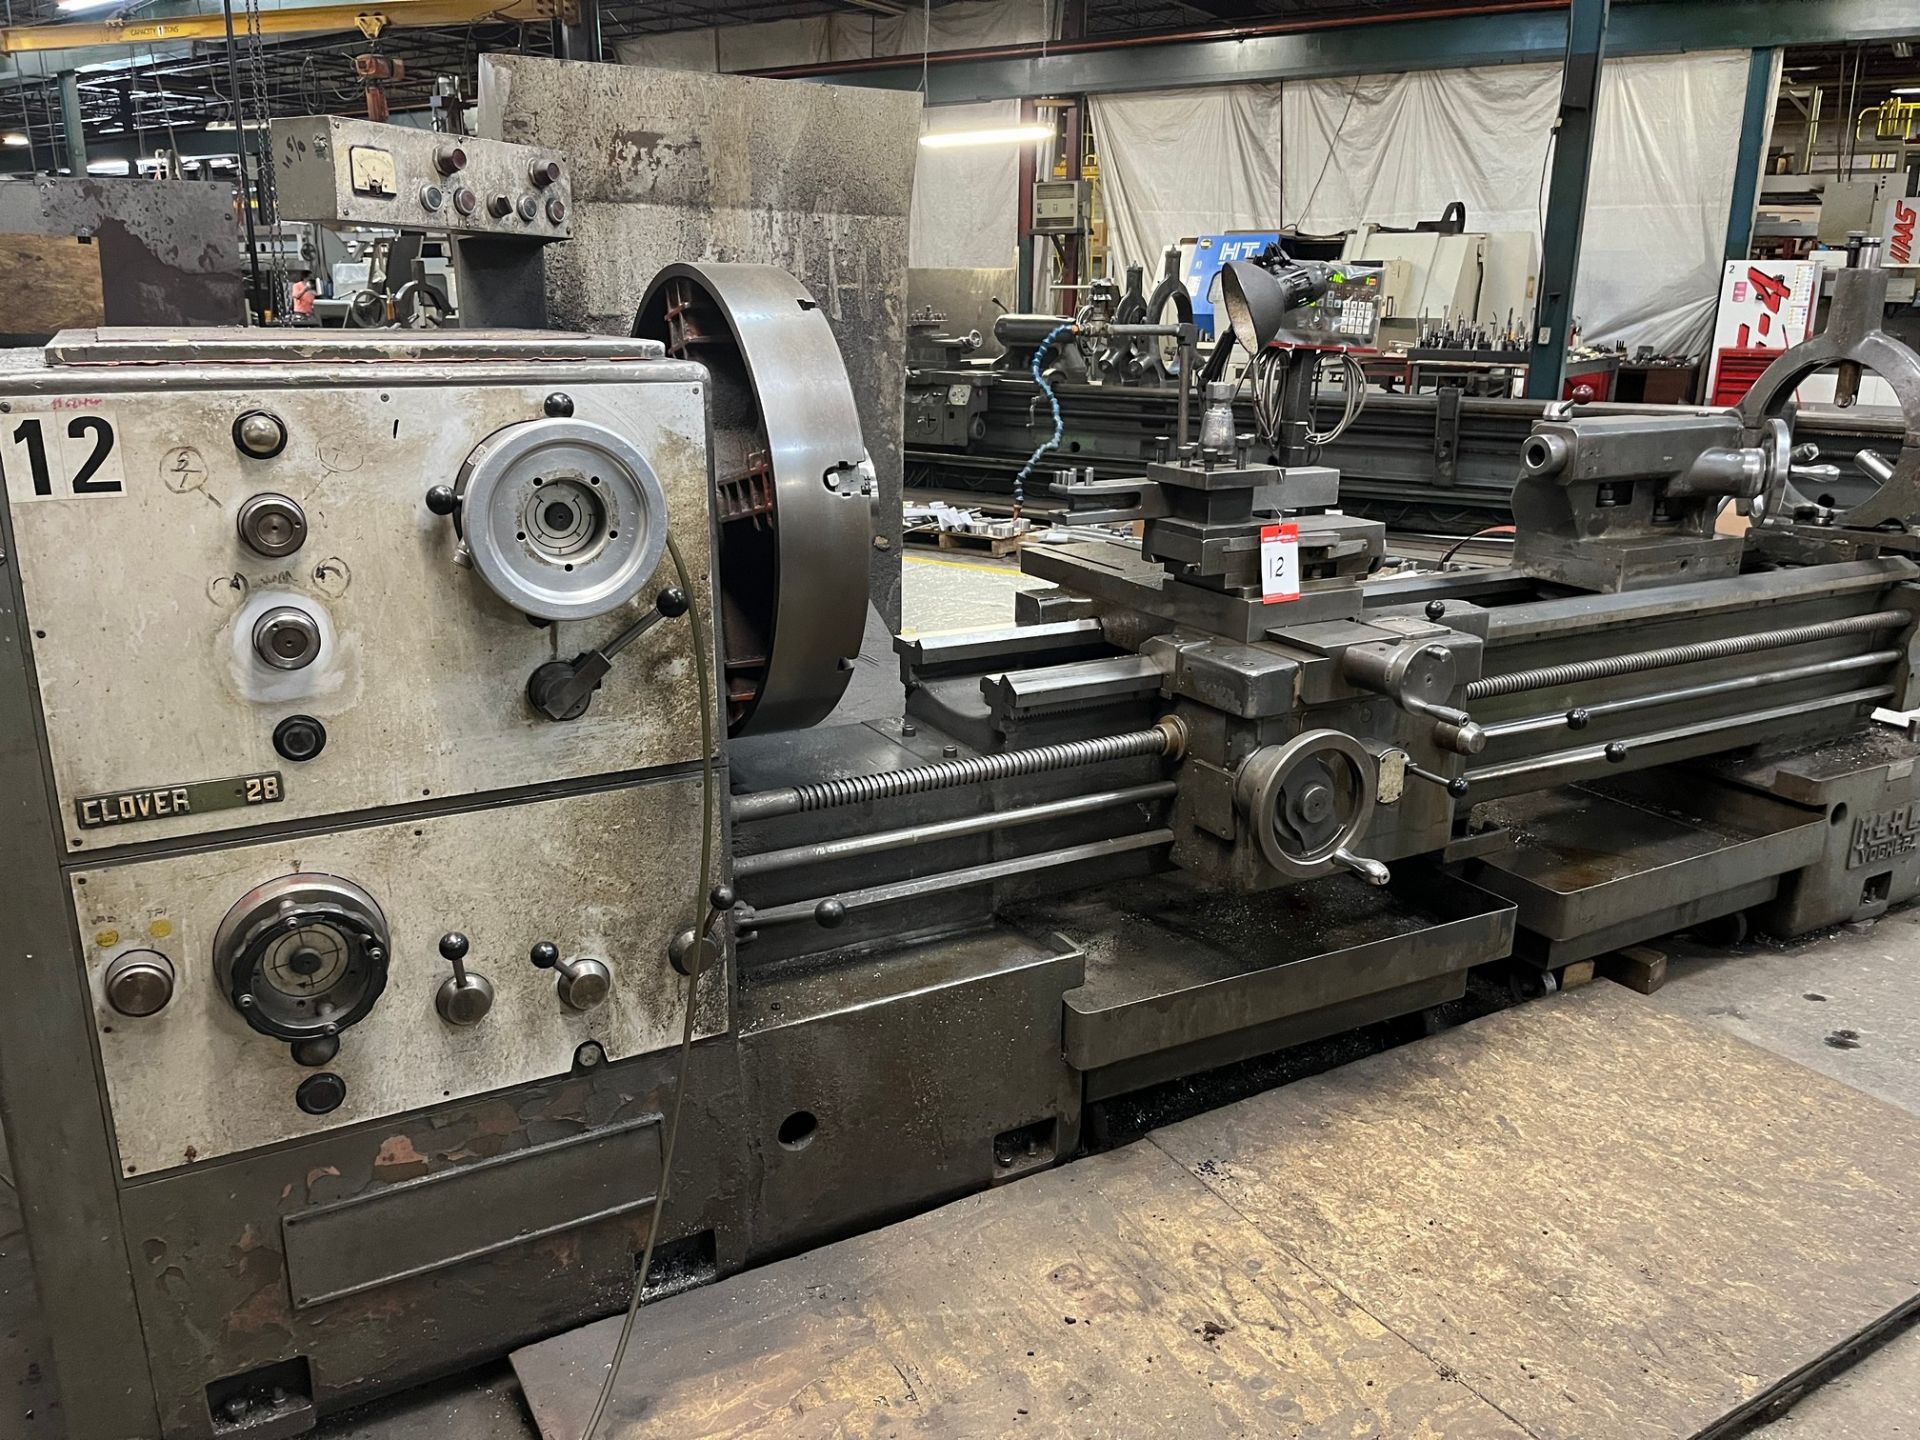 CLOVER 28 GAP BED ENGINE LATHE, MITUTOYO 2-AXIS DRO, 24” SWING OVER BED, 36” SWING OVER GAP, 80”